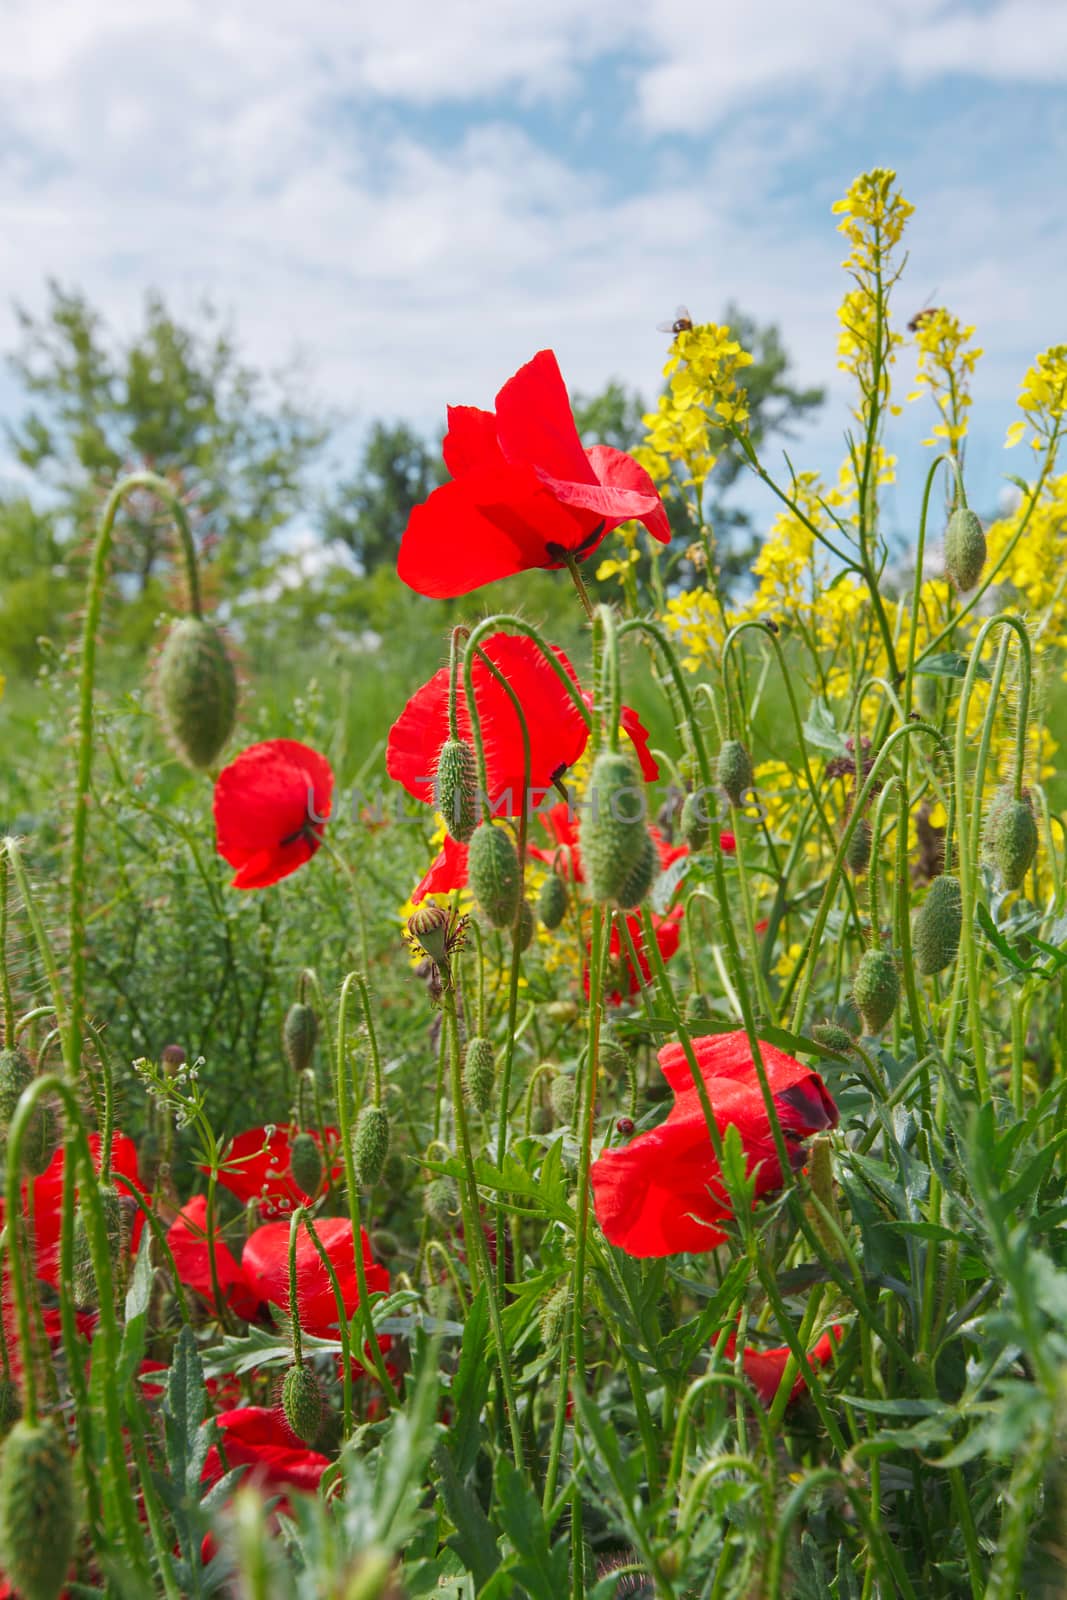 Field of poppies and rapeseed against blue sky, close up